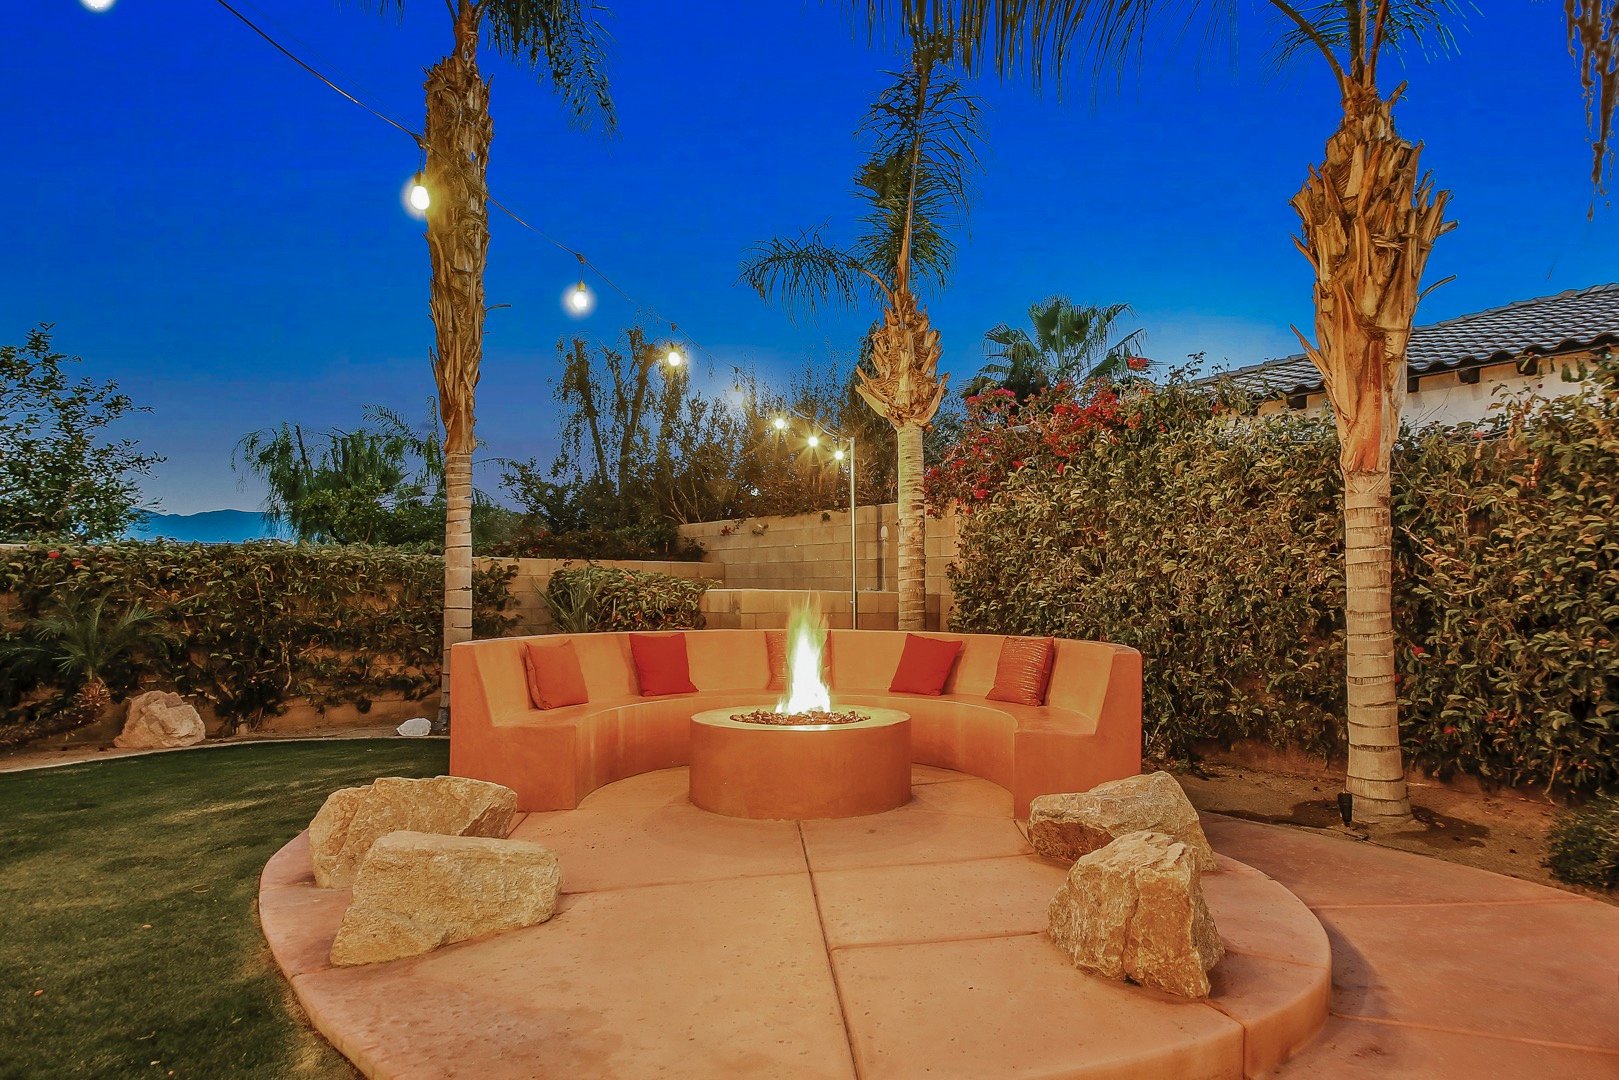 Fire pit seating for 15+ guests!